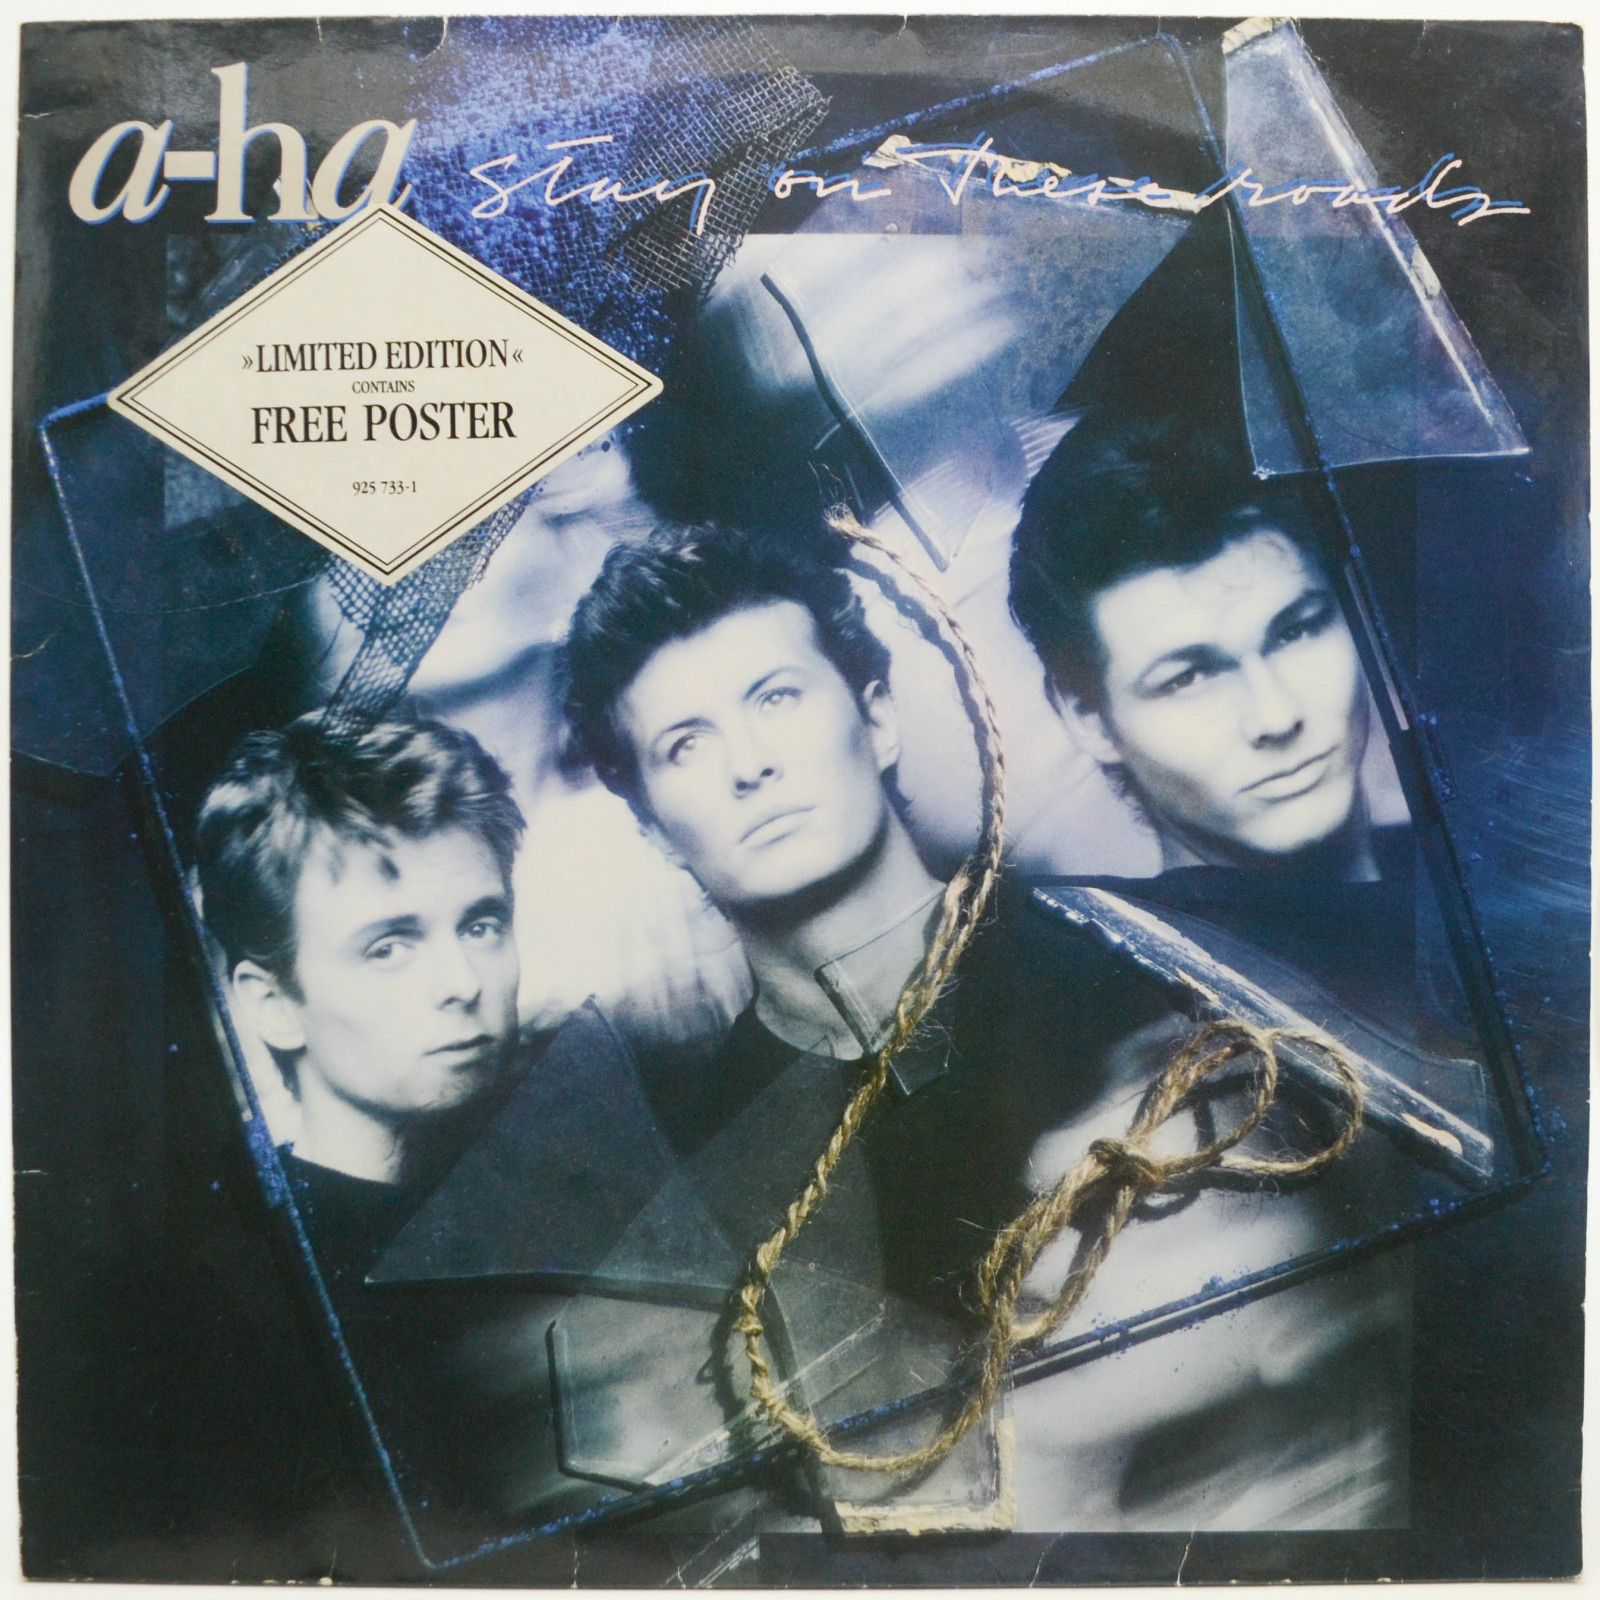 a-ha — Stay On These Roads, 1988